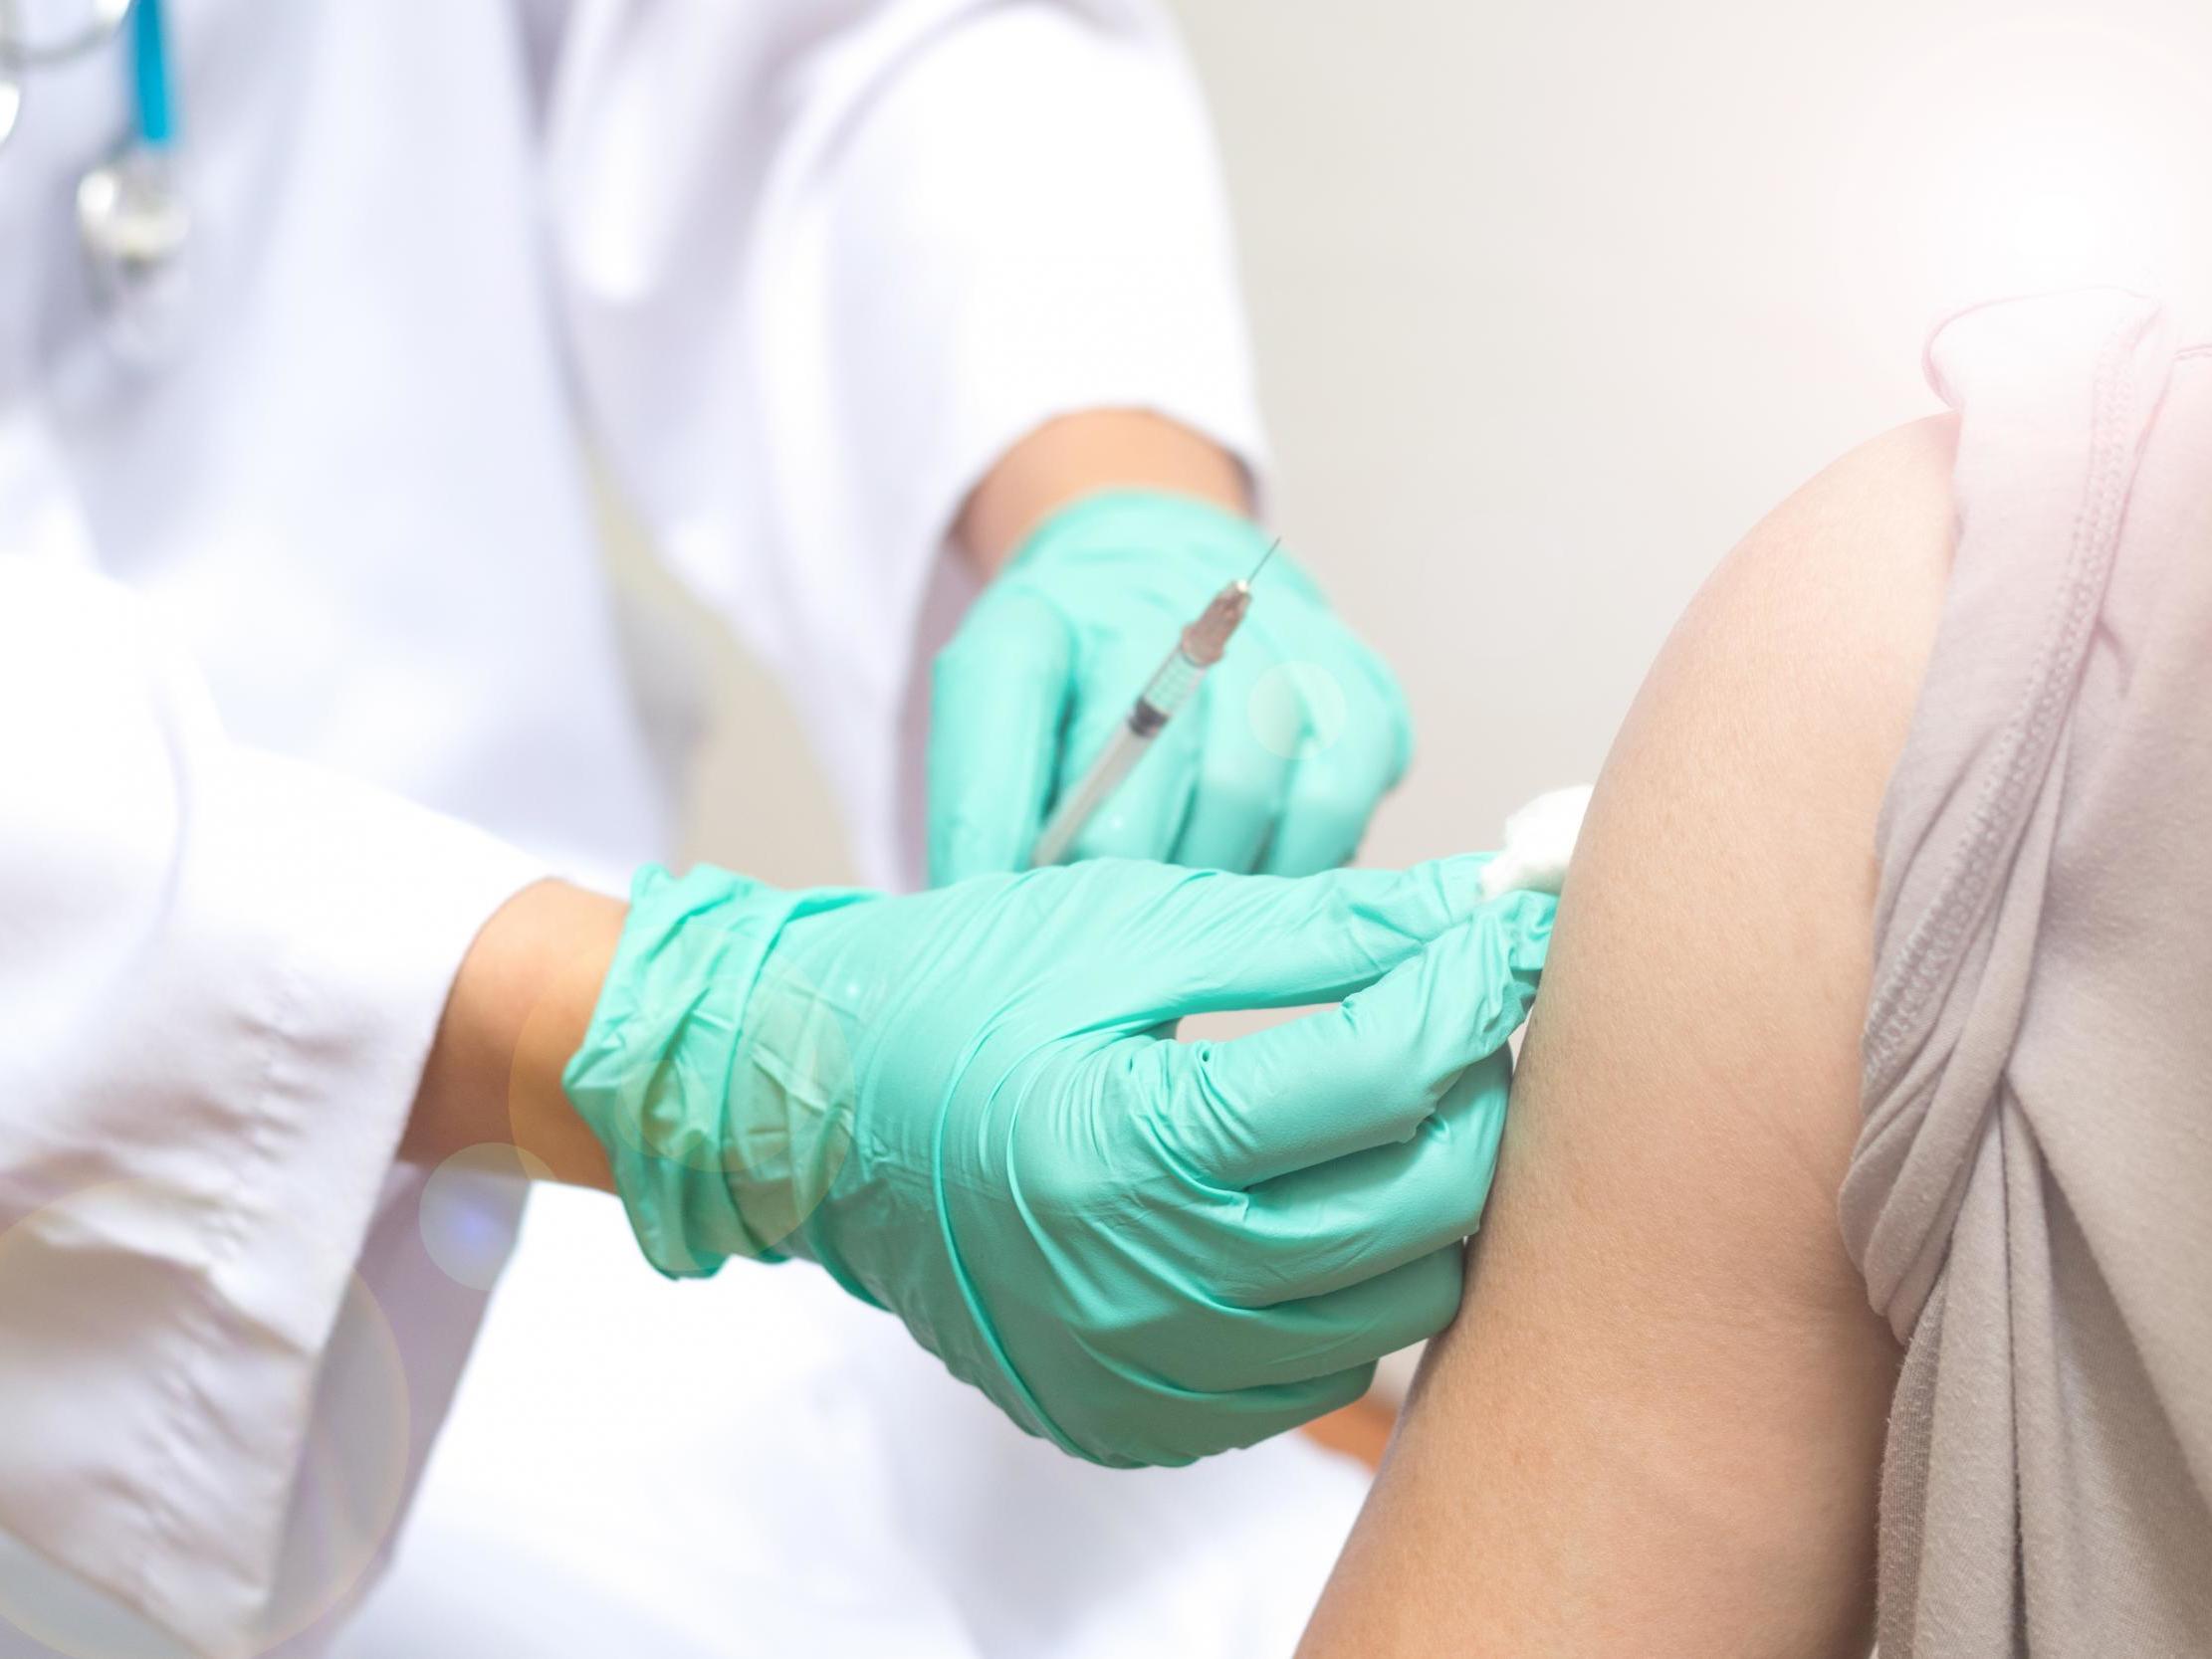 File image of vaccination